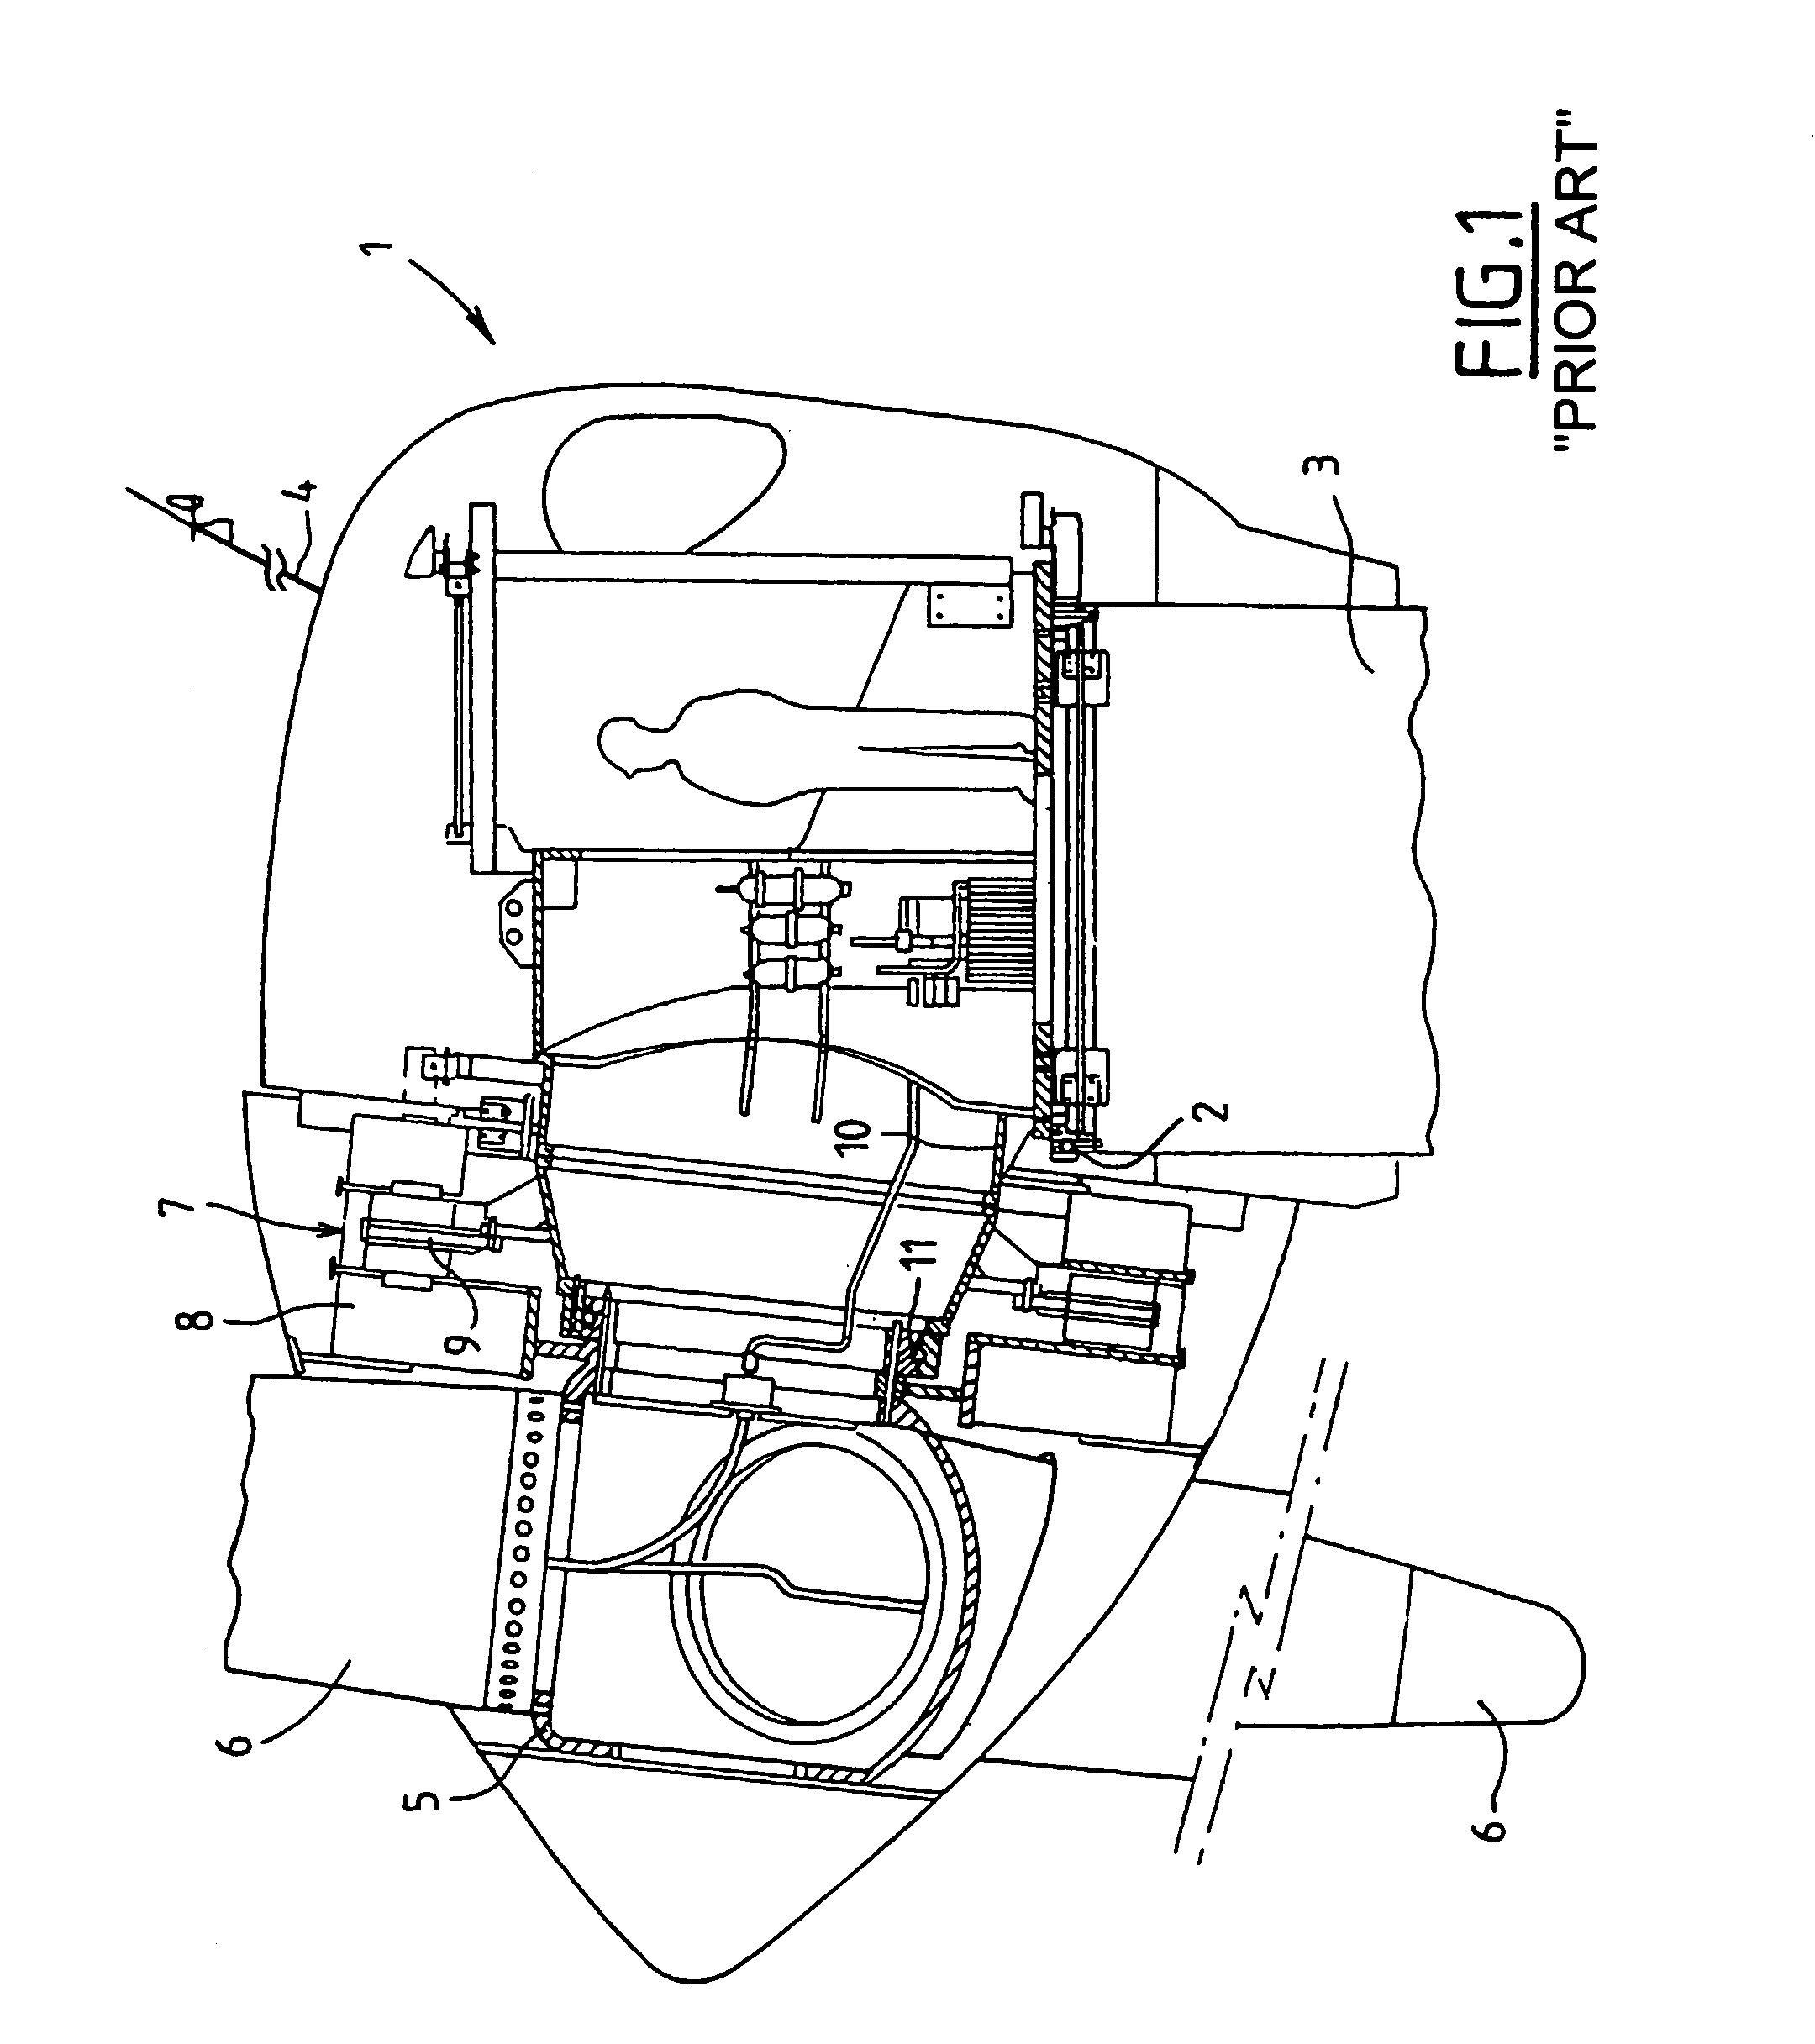 Method and device for regulating a wind machine